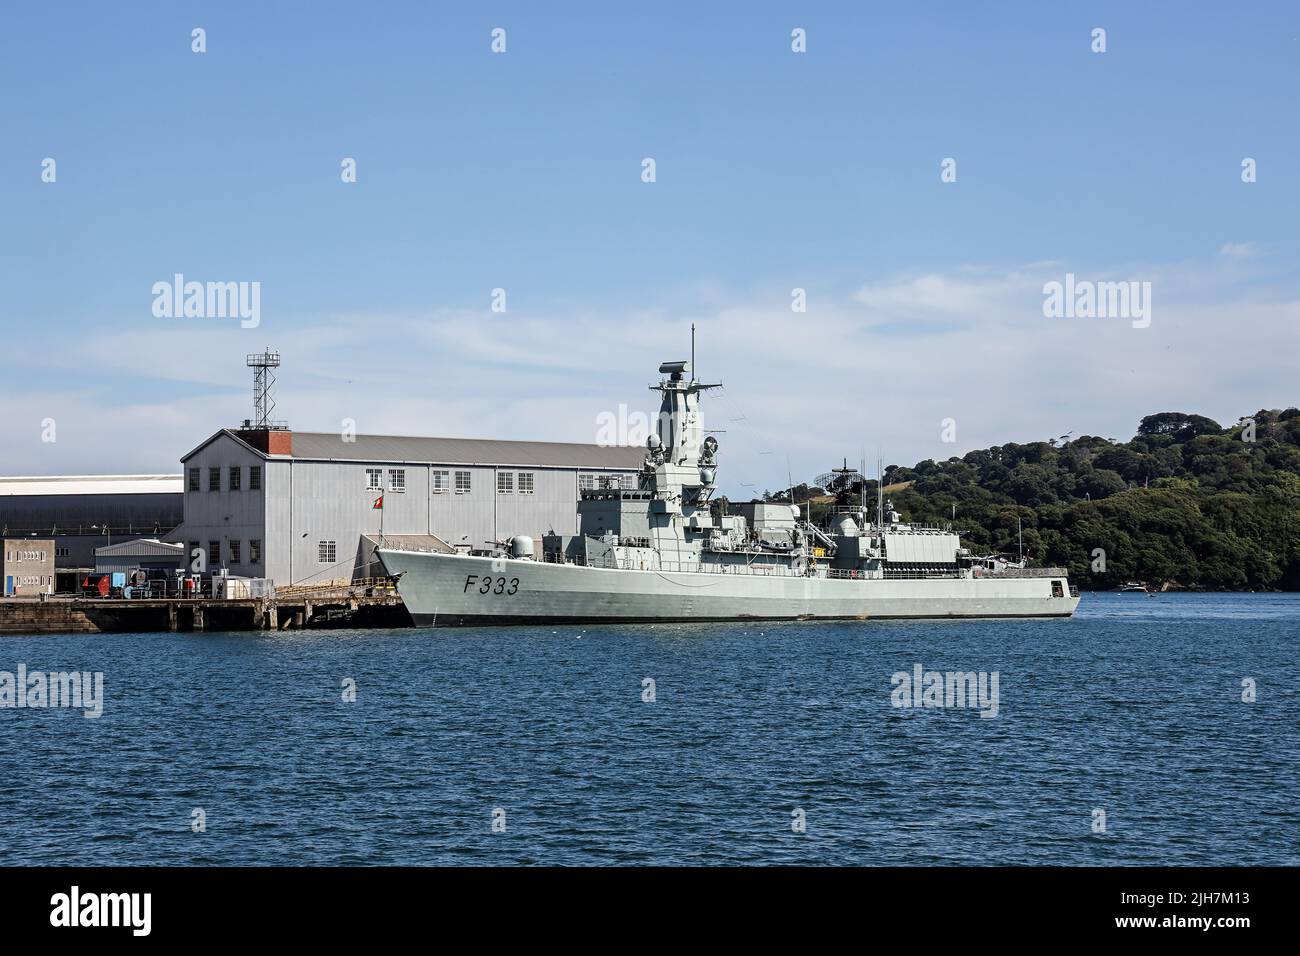 The Frigate F333 docked at South Yard, Devonport Dockyard, on the banks of the River Tamar. NRP Bartolomeu Dias is in the Portuguese Navy. Stock Photo